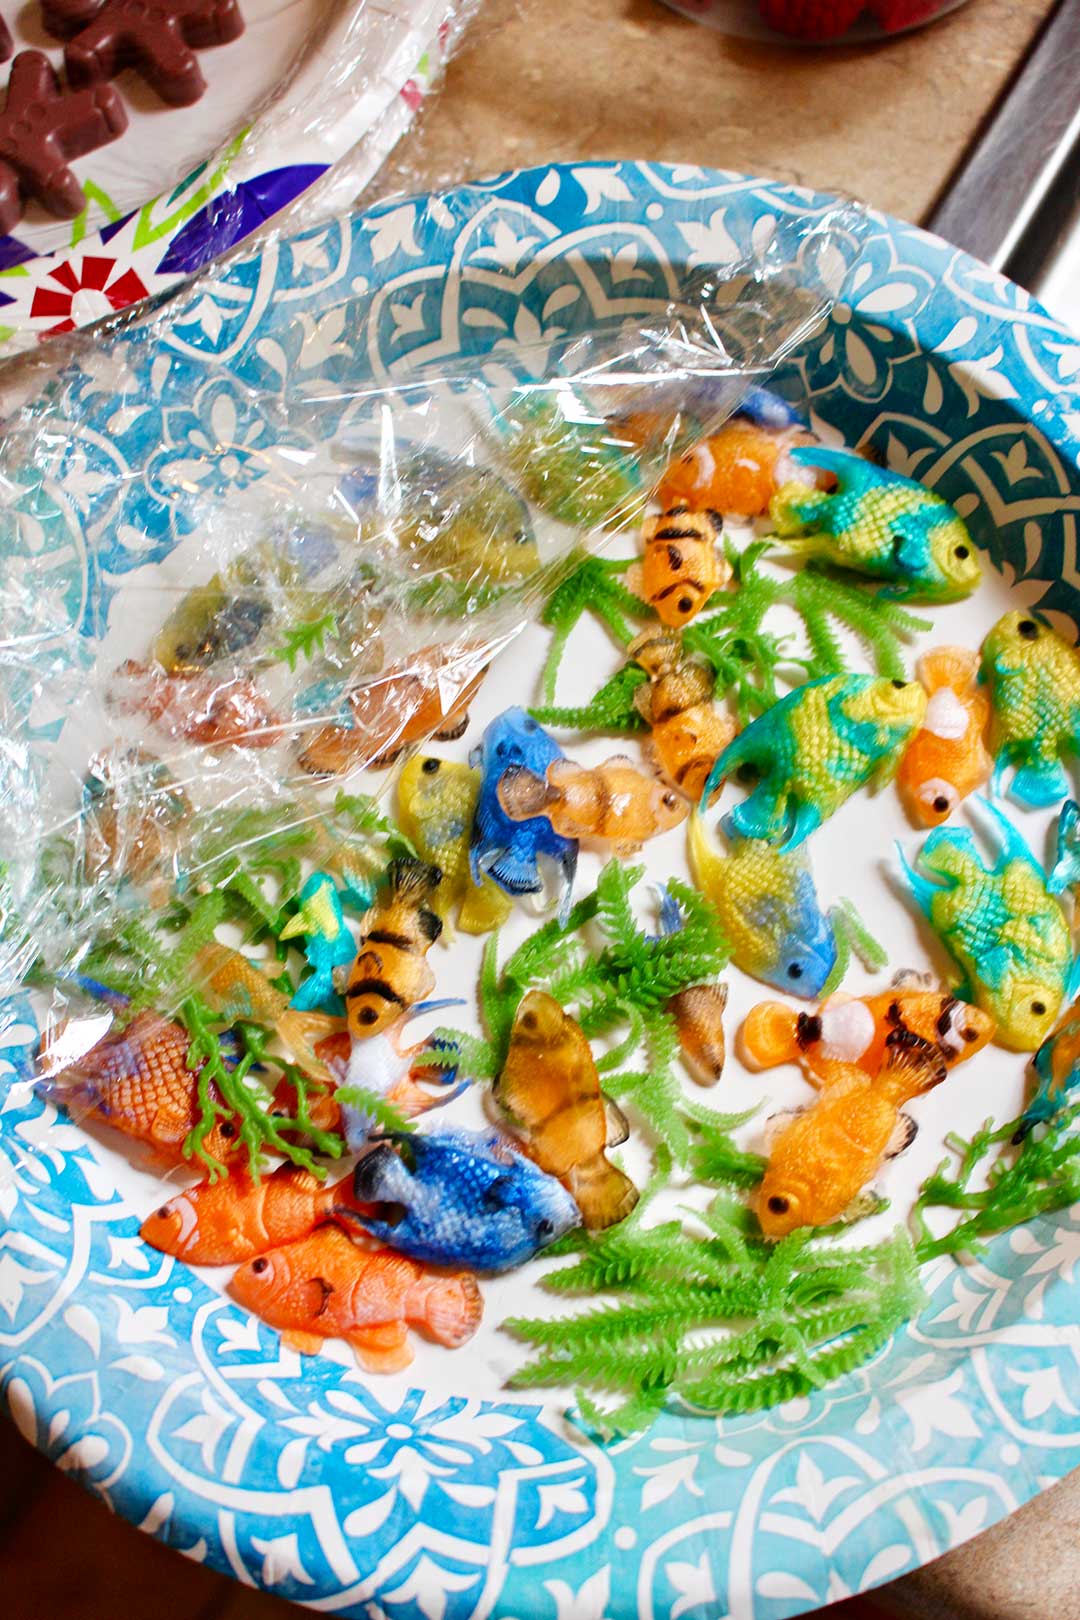 Paper plate with many various plastic tropical fish and sea plants.